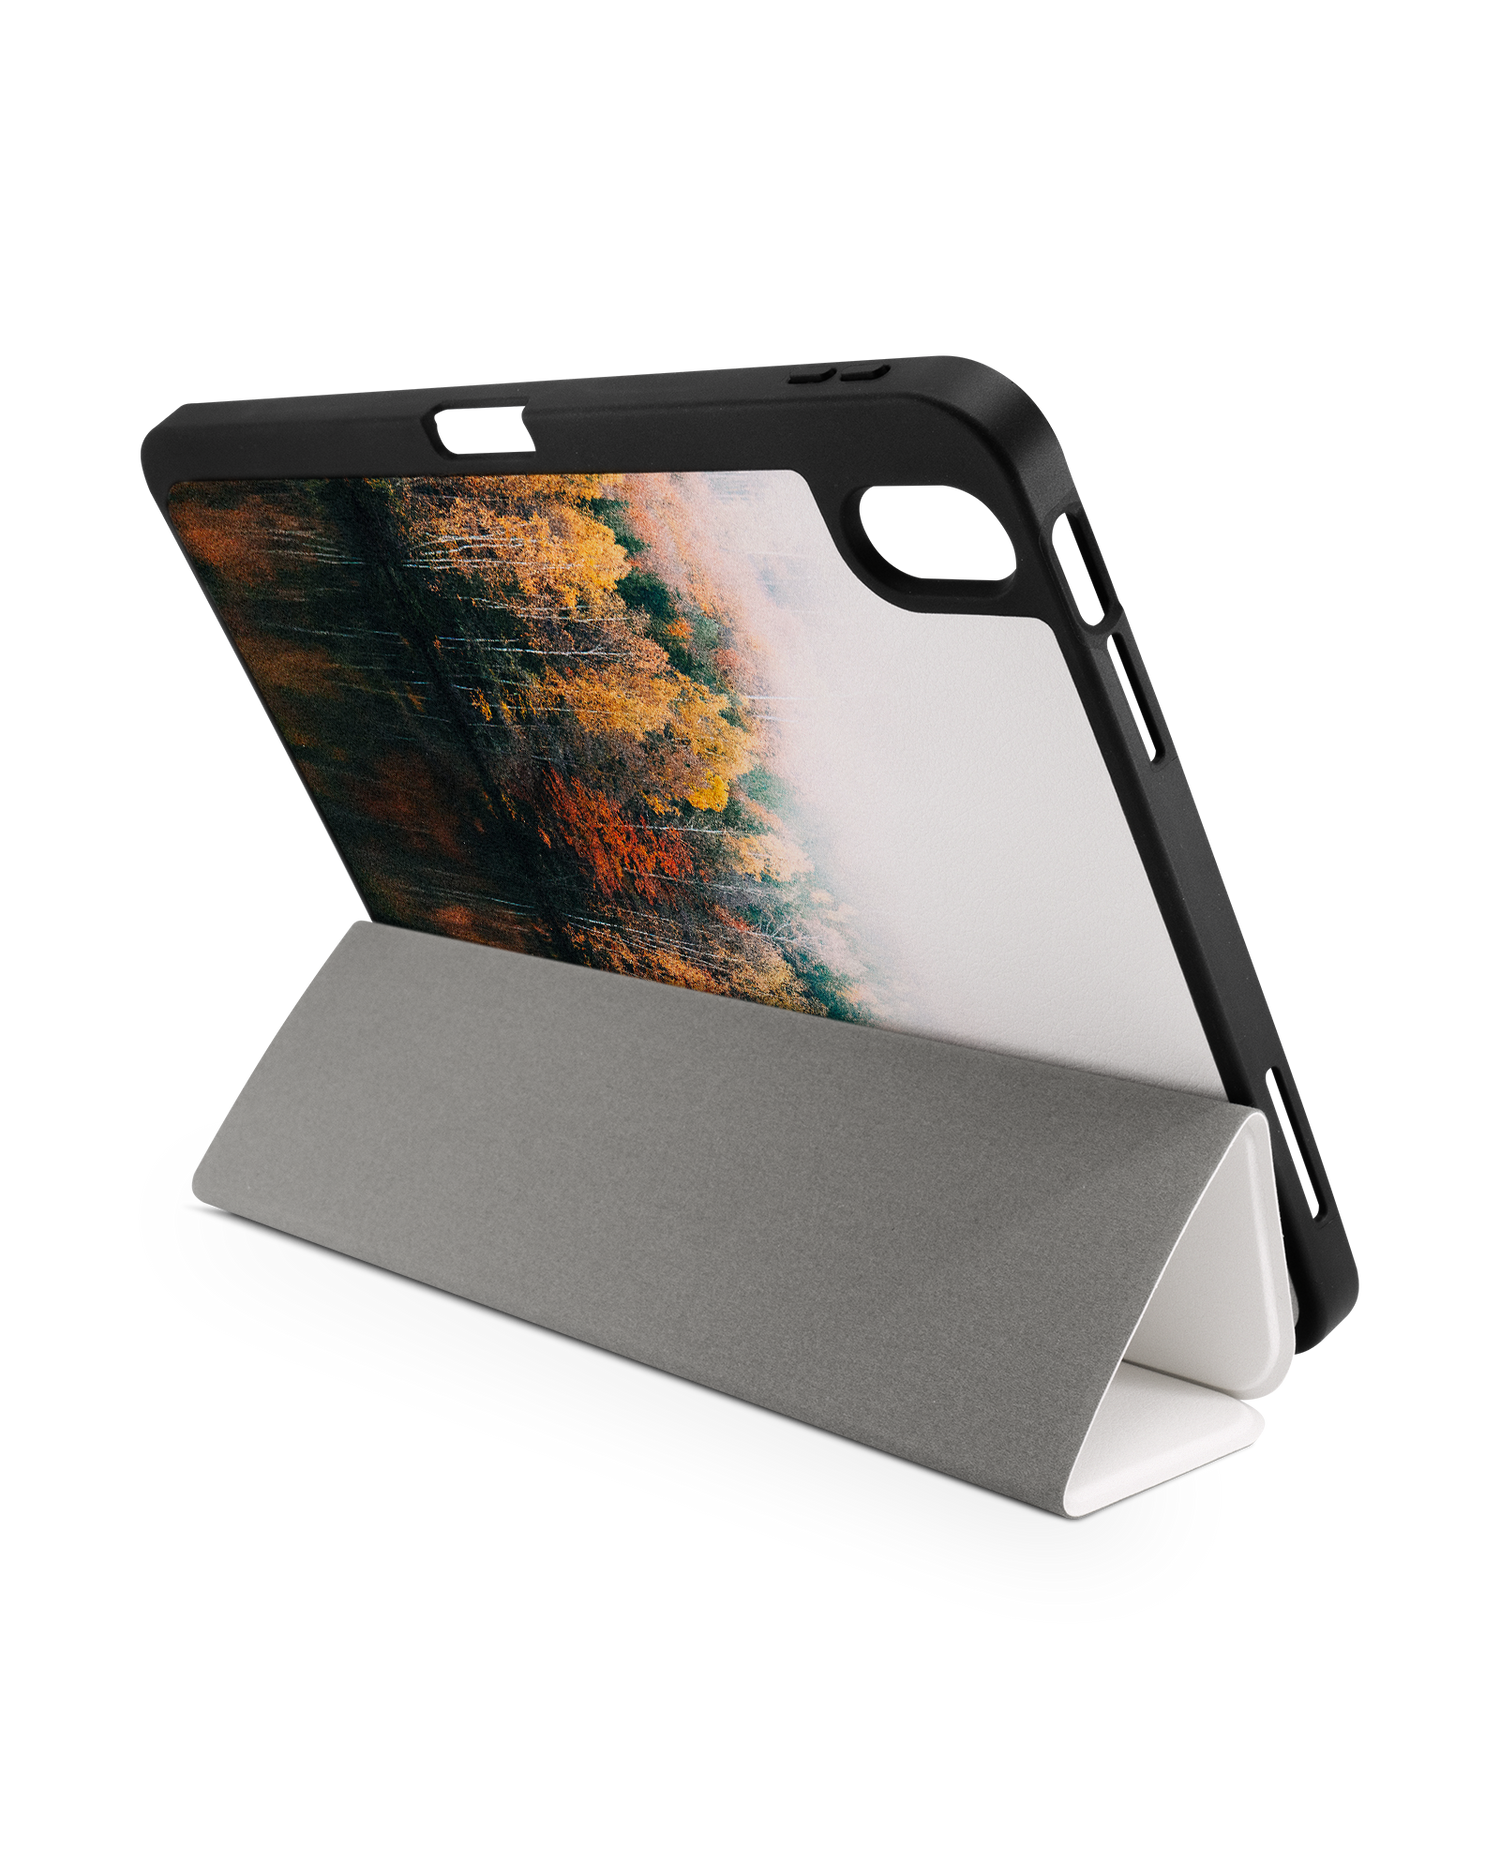 Fall Fog iPad Case with Pencil Holder for Apple iPad (10th Generation): Set up in landscape format (back view)